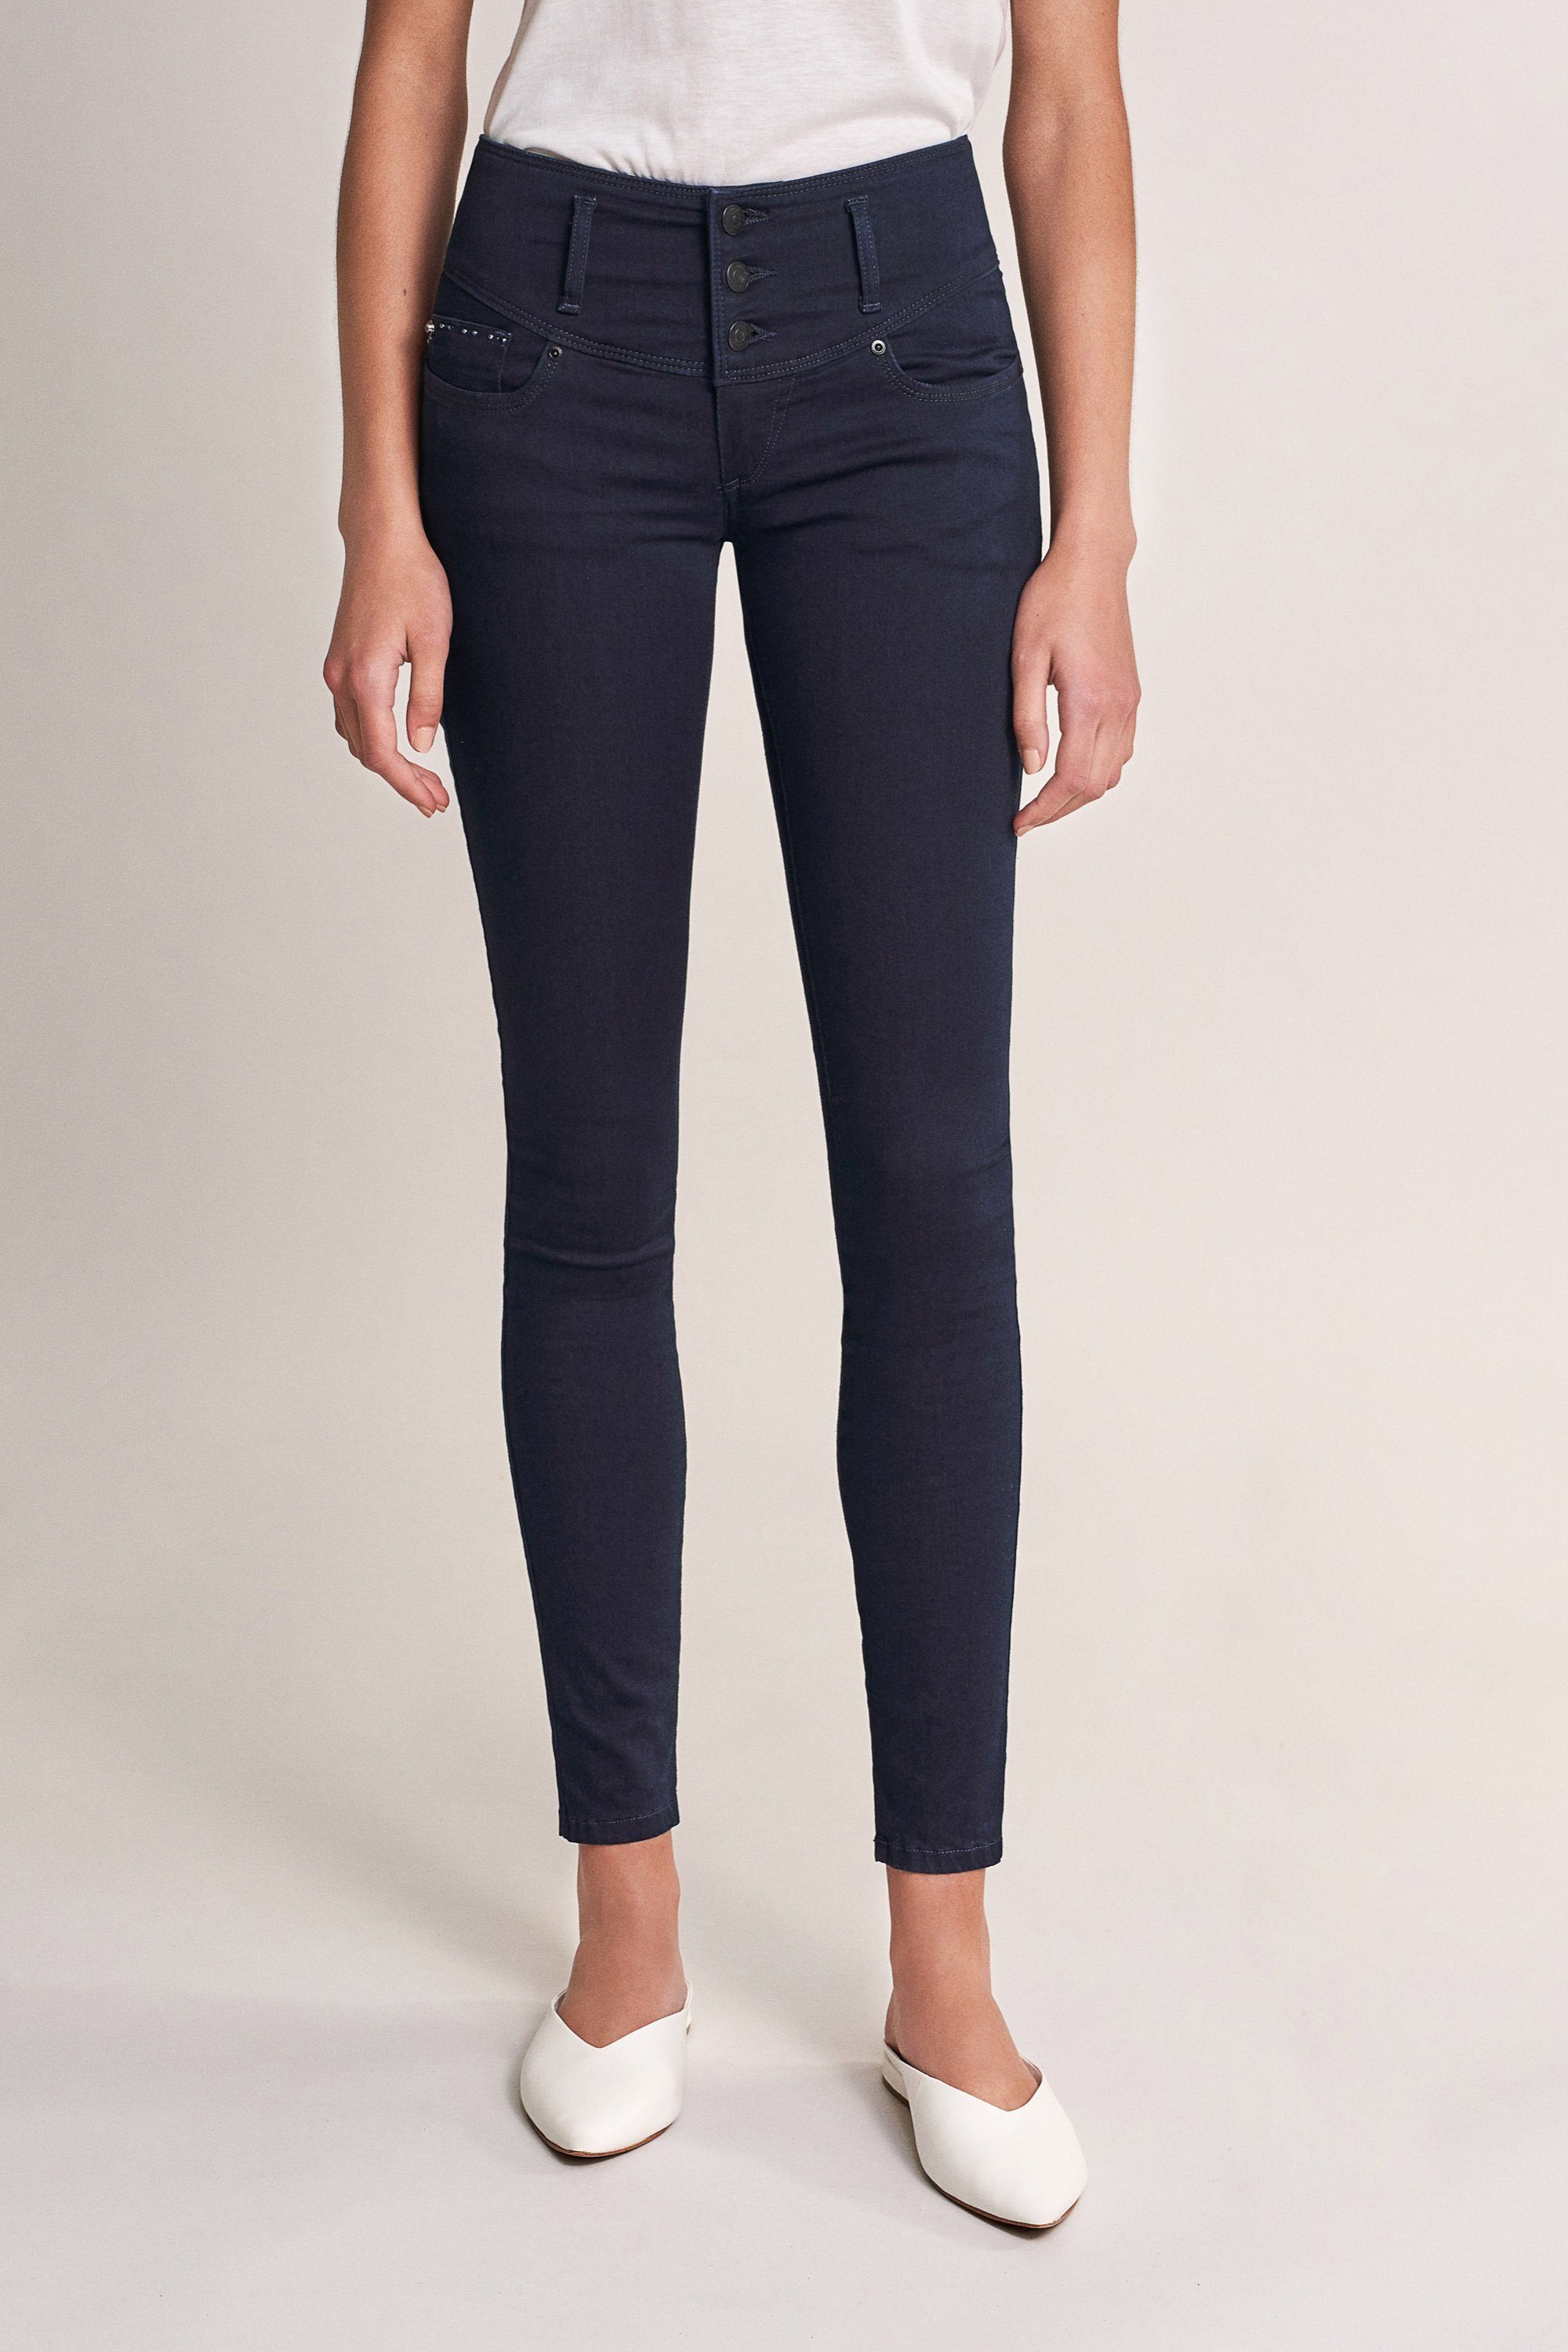 Salsa Stretch-Jeans touch SALSA 124254 MYSTERY dark blue UP coating SKINNY soft PUSH JEANS